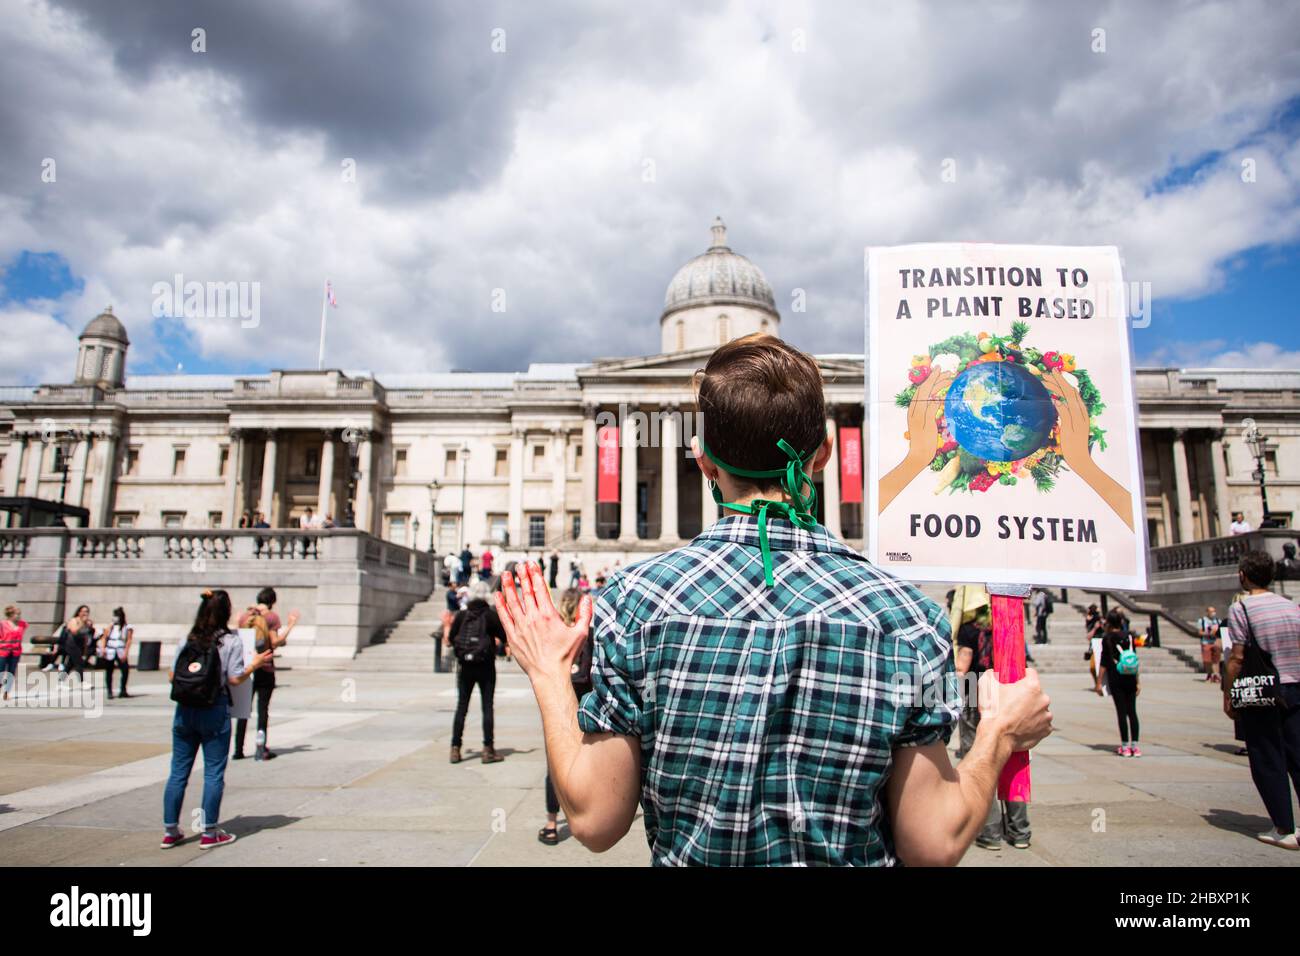 Animal Rebellion activists in Trafalgar Square holding placard Transition to a Plant Based Food System London 2020 Stock Photo